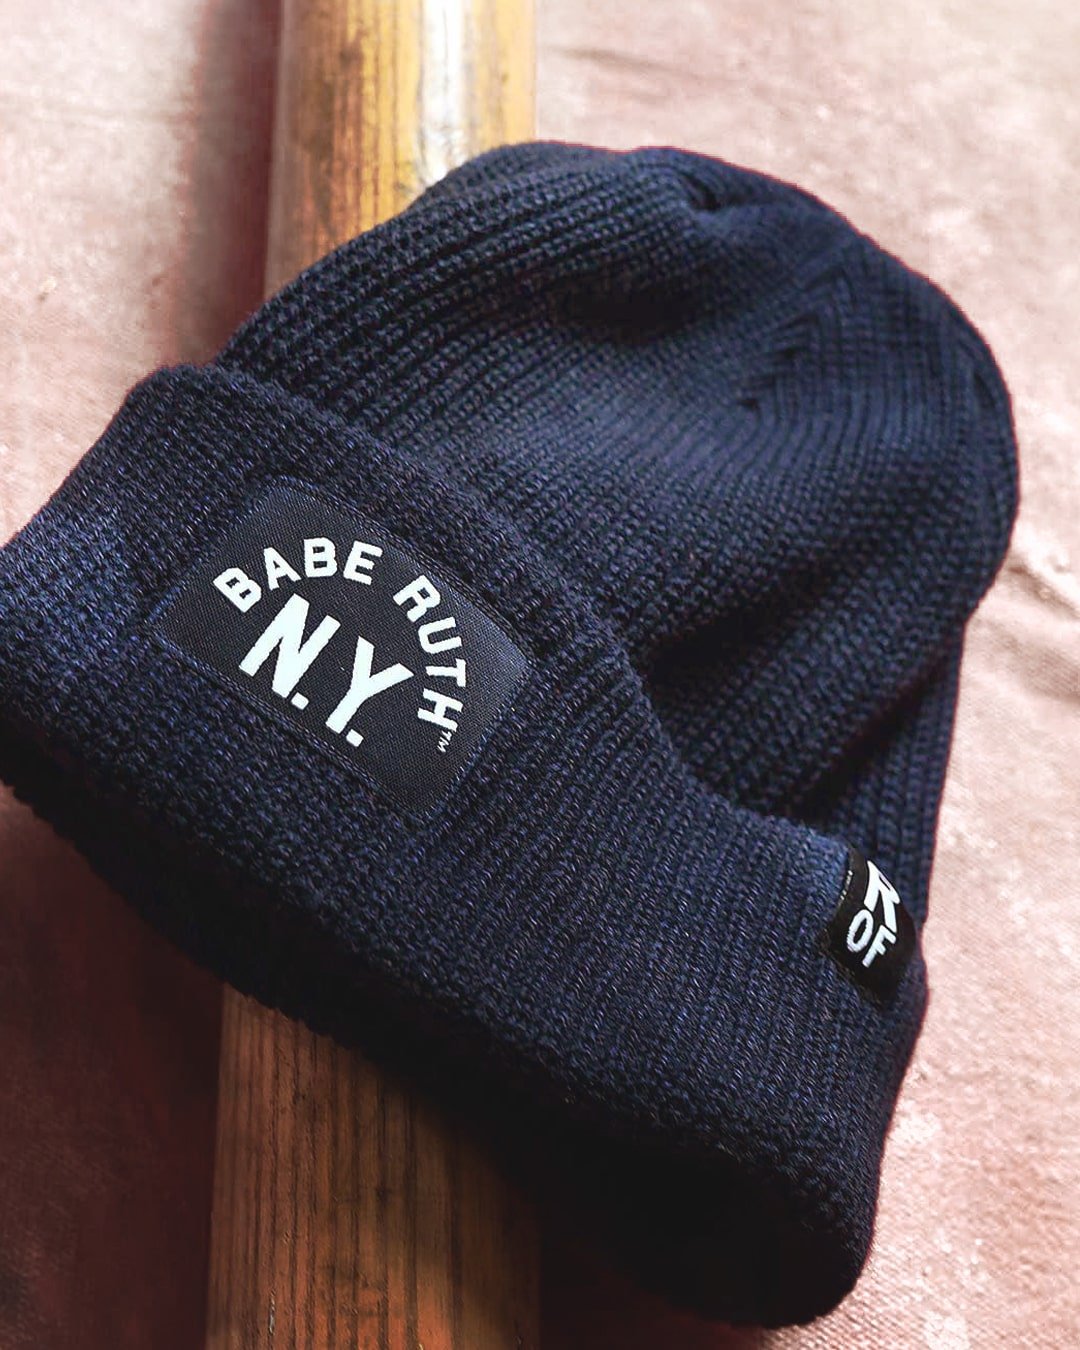 Babe Ruth N.Y. Navy Beanie - Roots of Fight International